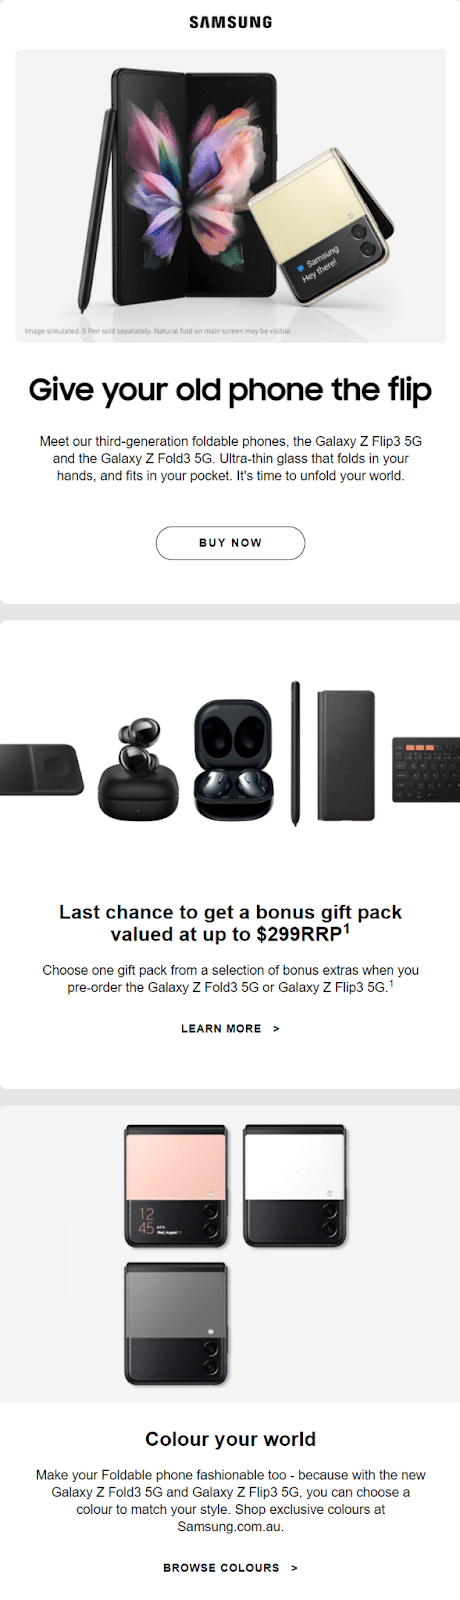 Product announcement email from Samsung